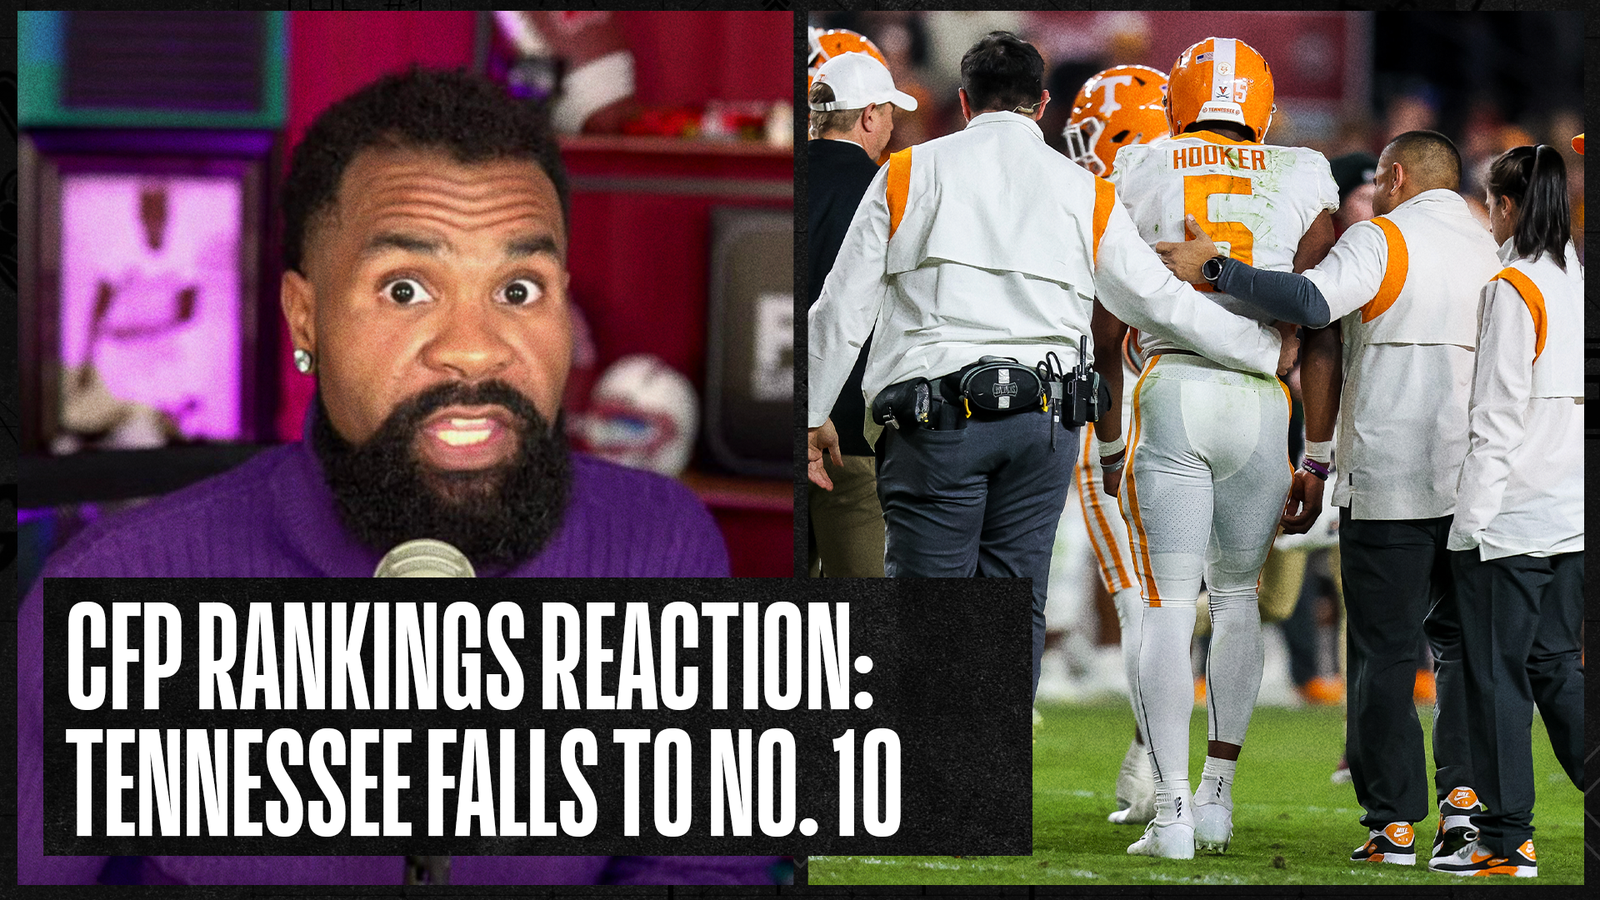 CFP Rankings Response: Tennessee Drops to 10th